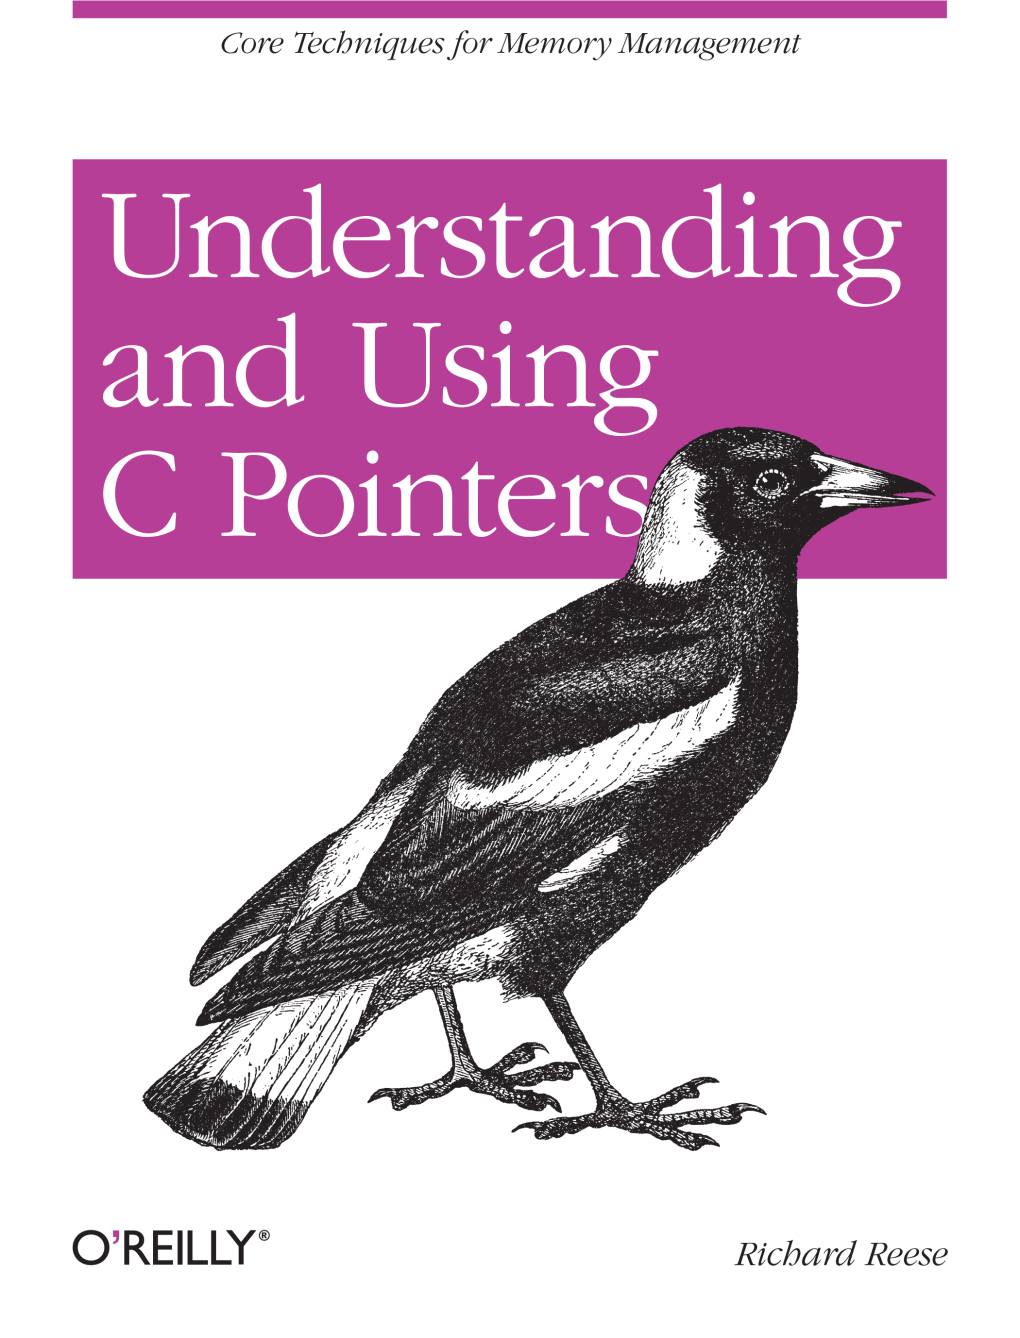 Richard Reese — «Understanding and Using C Pointers